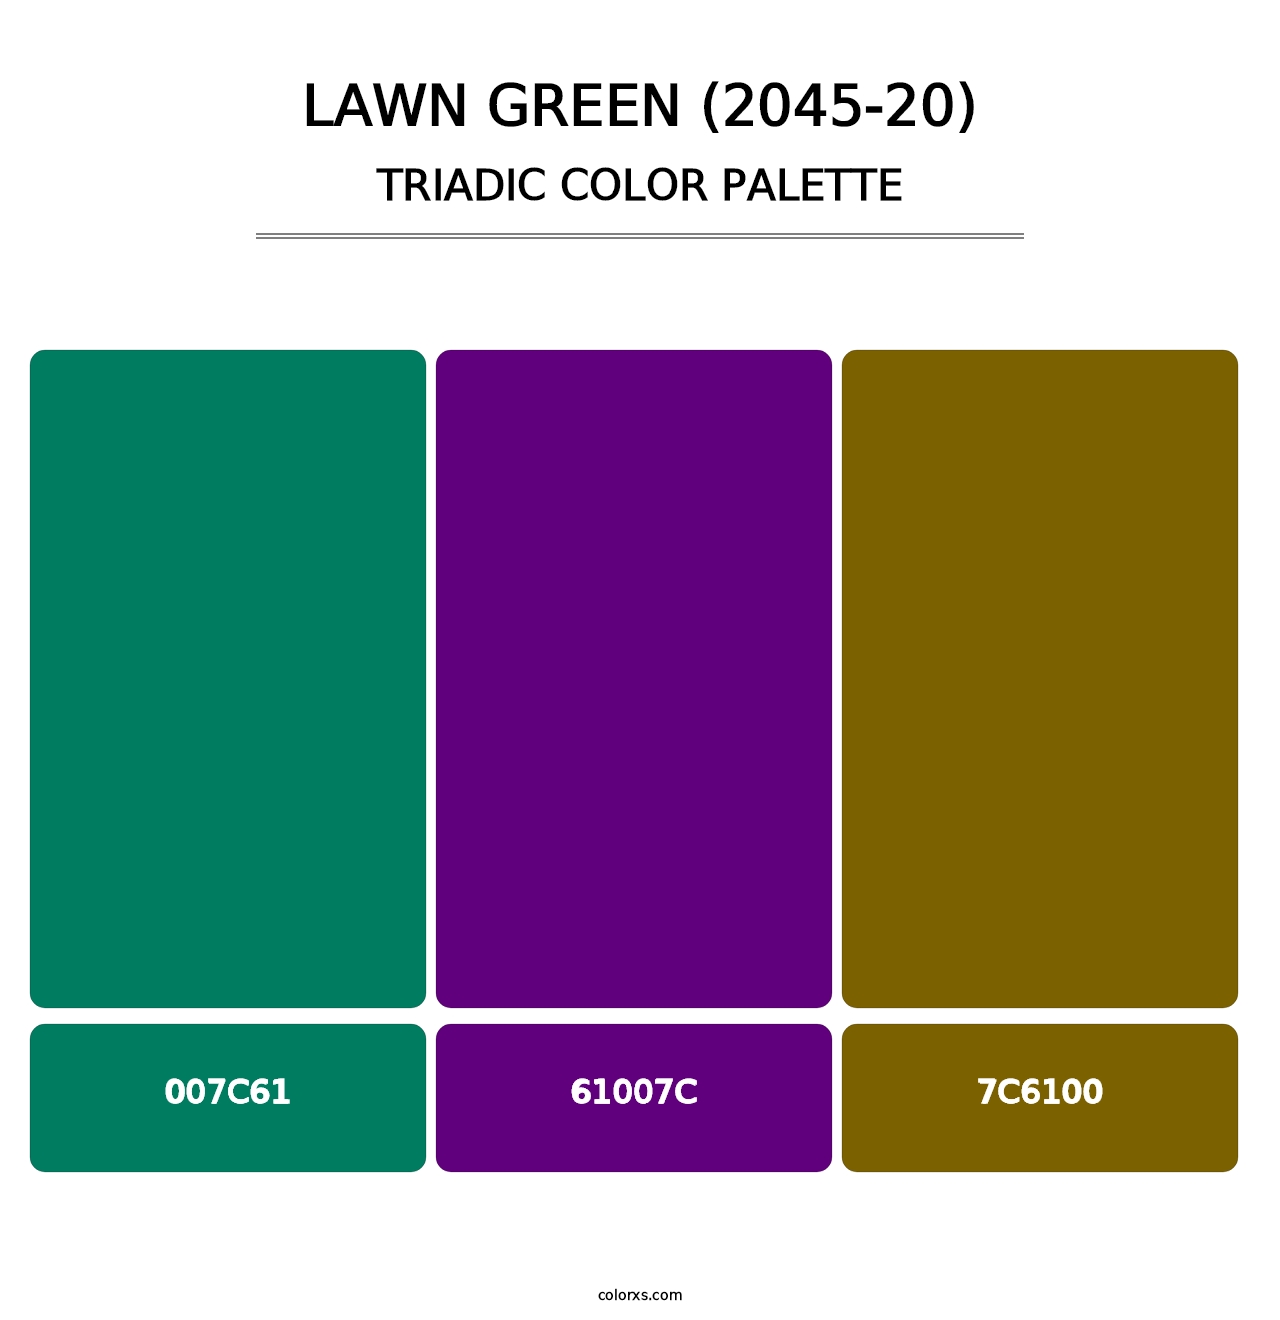 Lawn Green (2045-20) - Triadic Color Palette